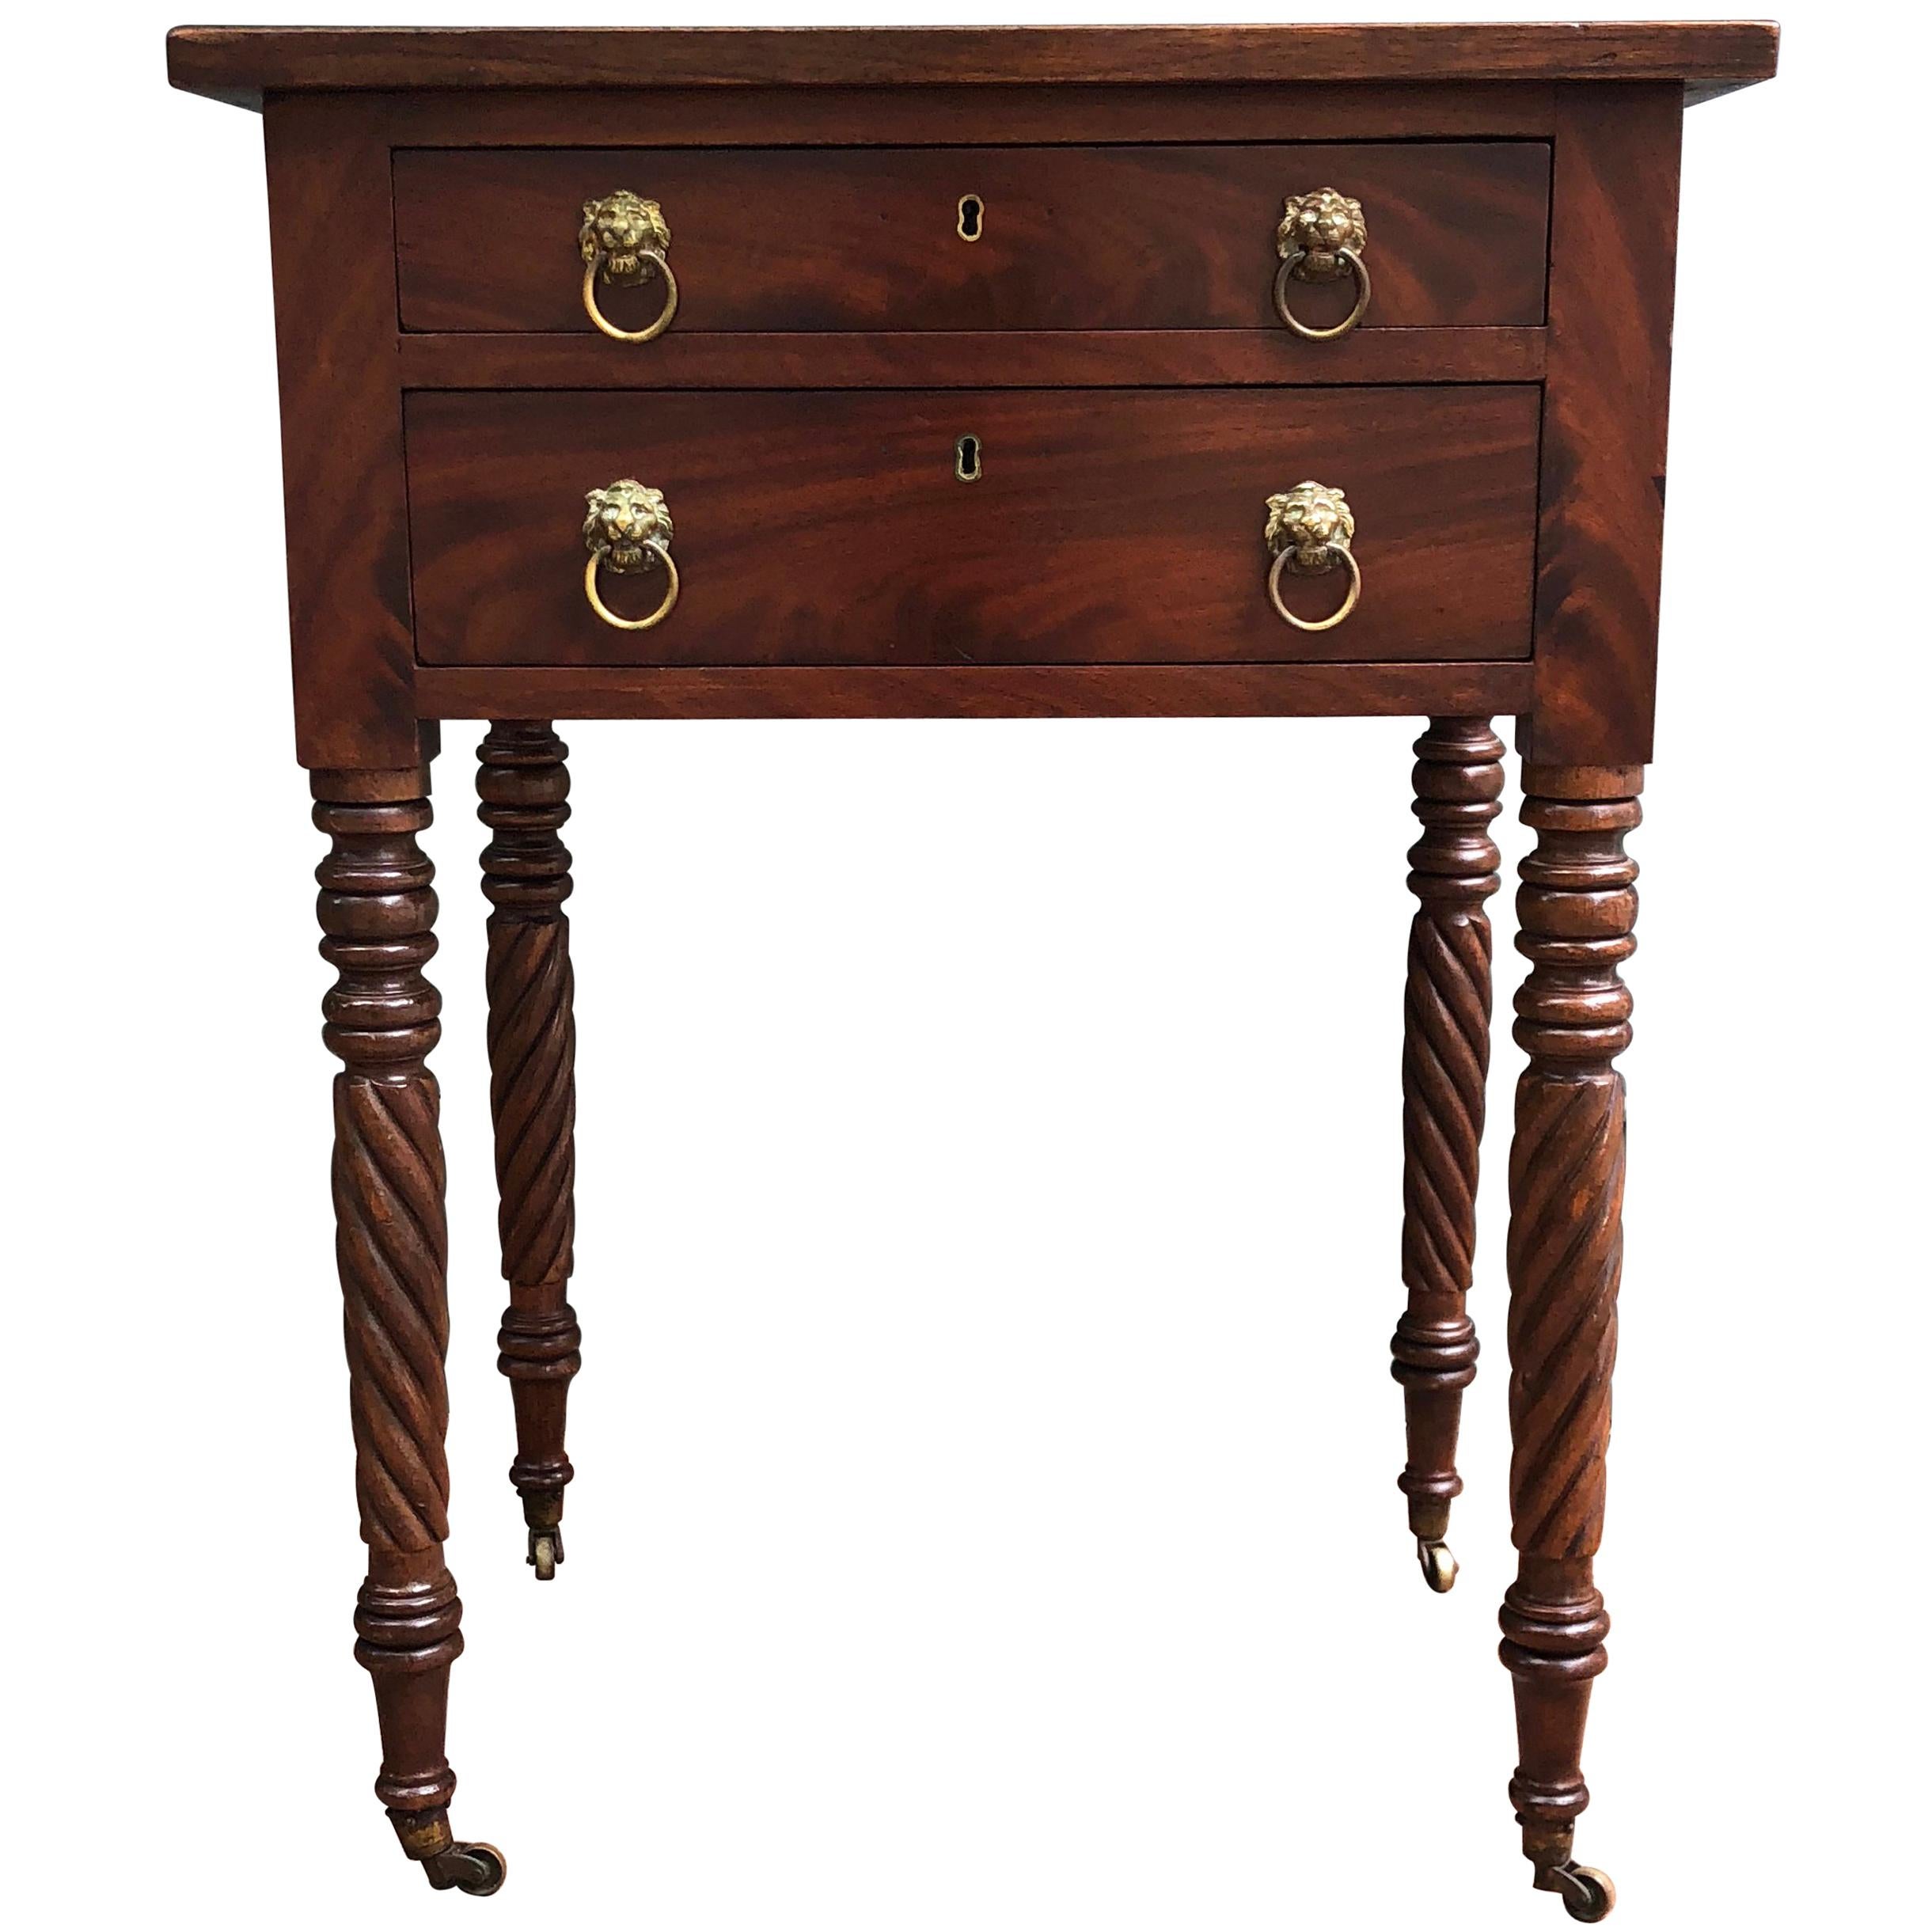  Early 19th Century American Mahogany Work Table with Turned Legs